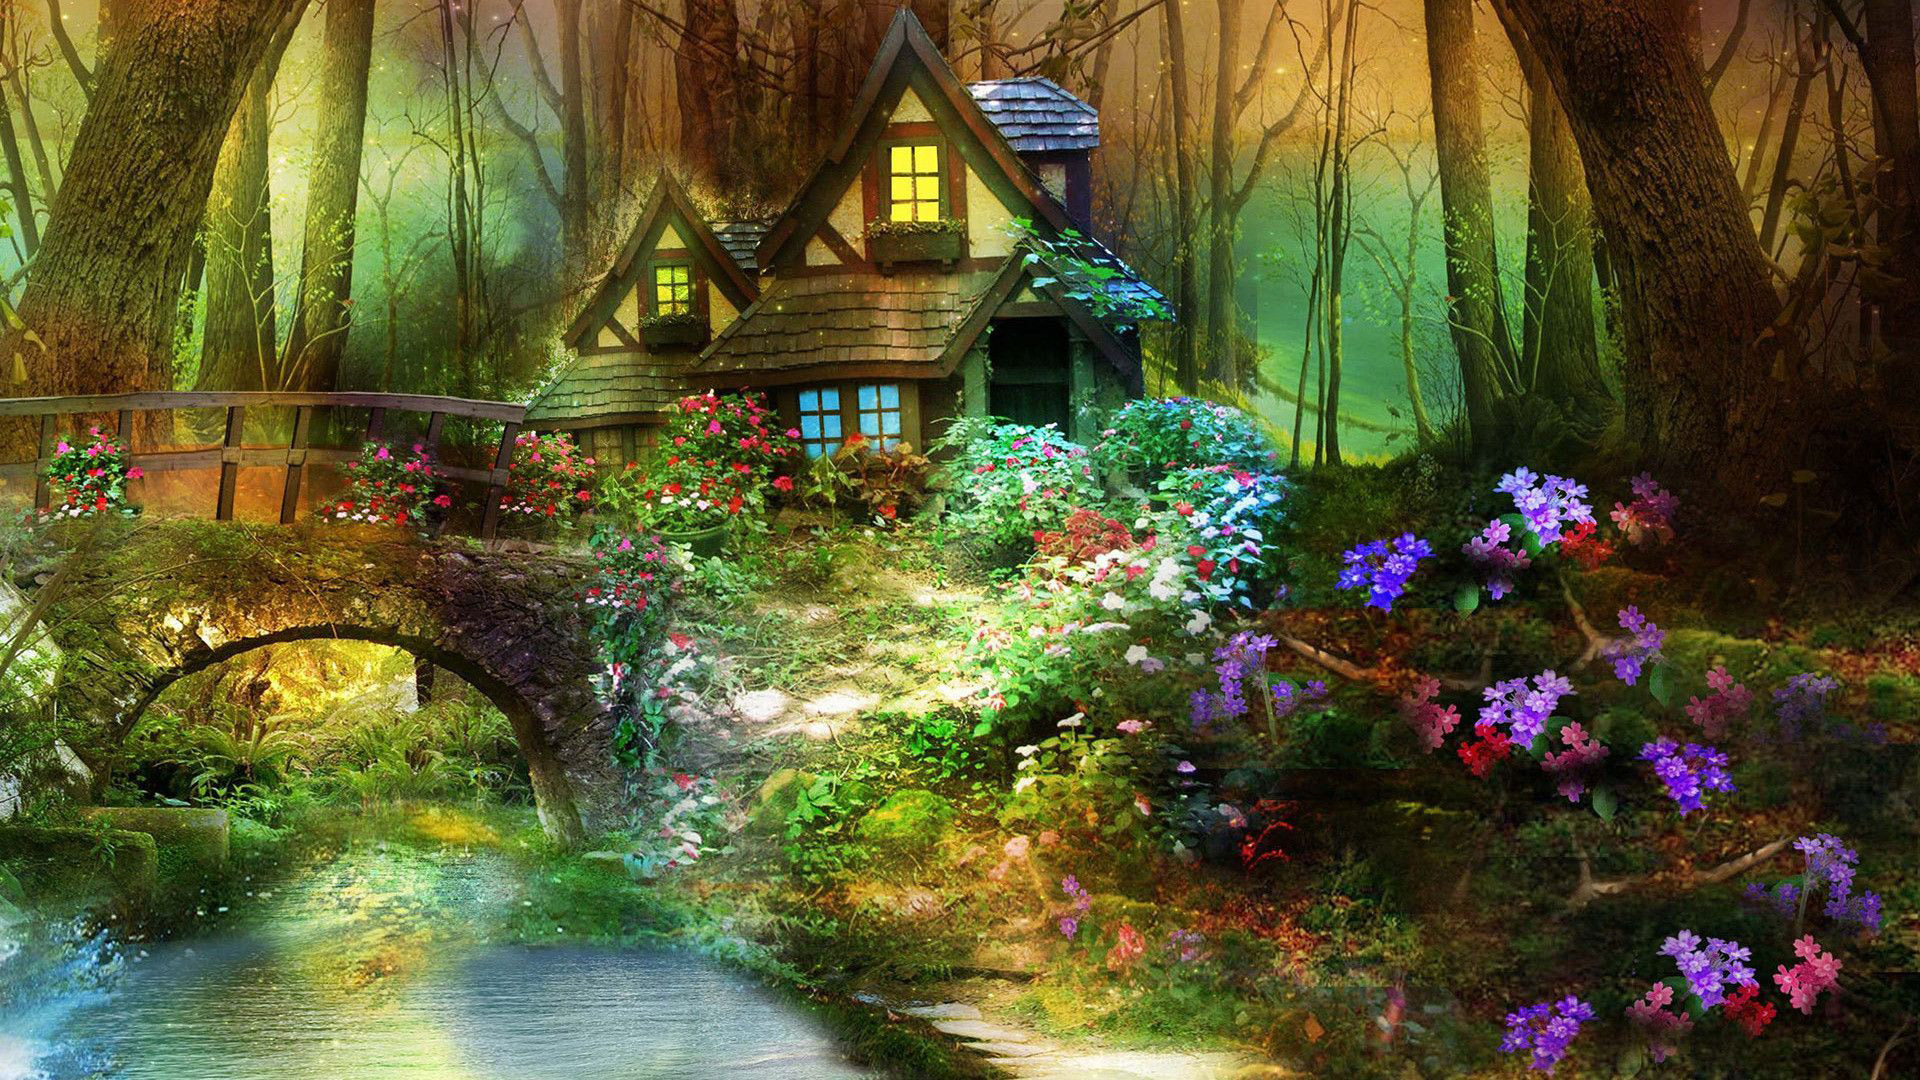 Mystical Forest wallpaper by CosmicThunder24  Download on ZEDGE  c324